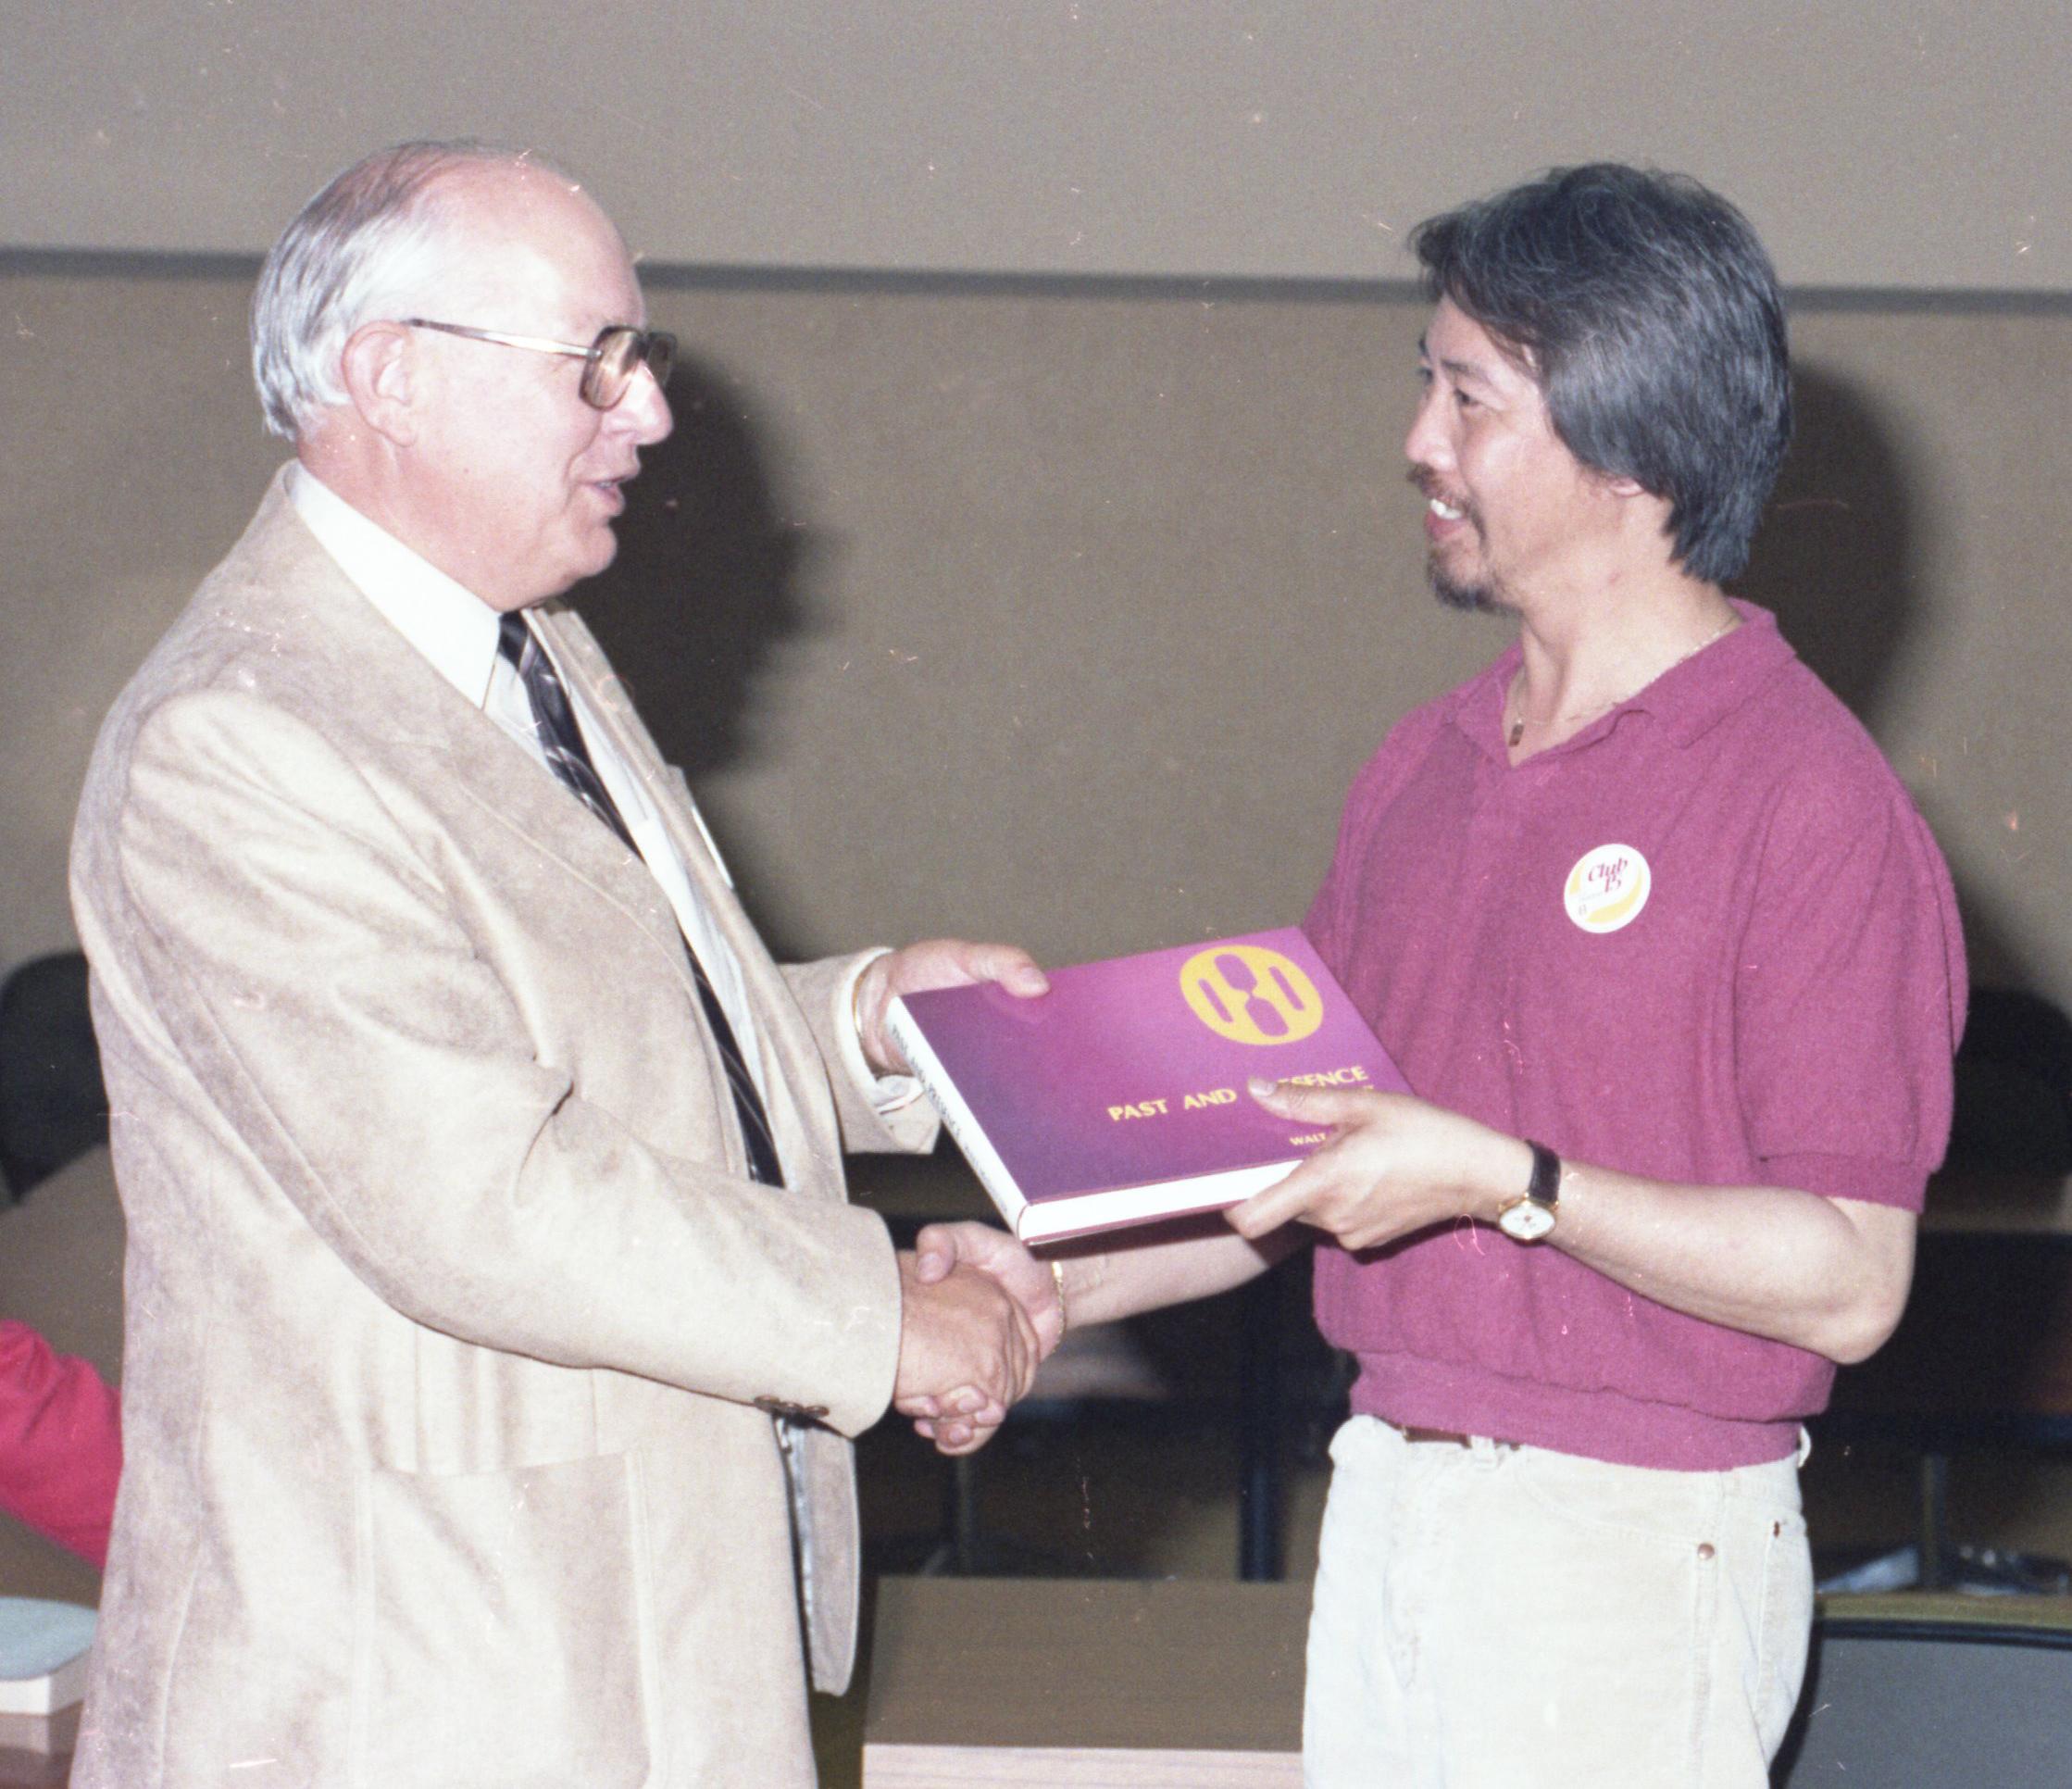 Two people shake hands while one is presented with a book.